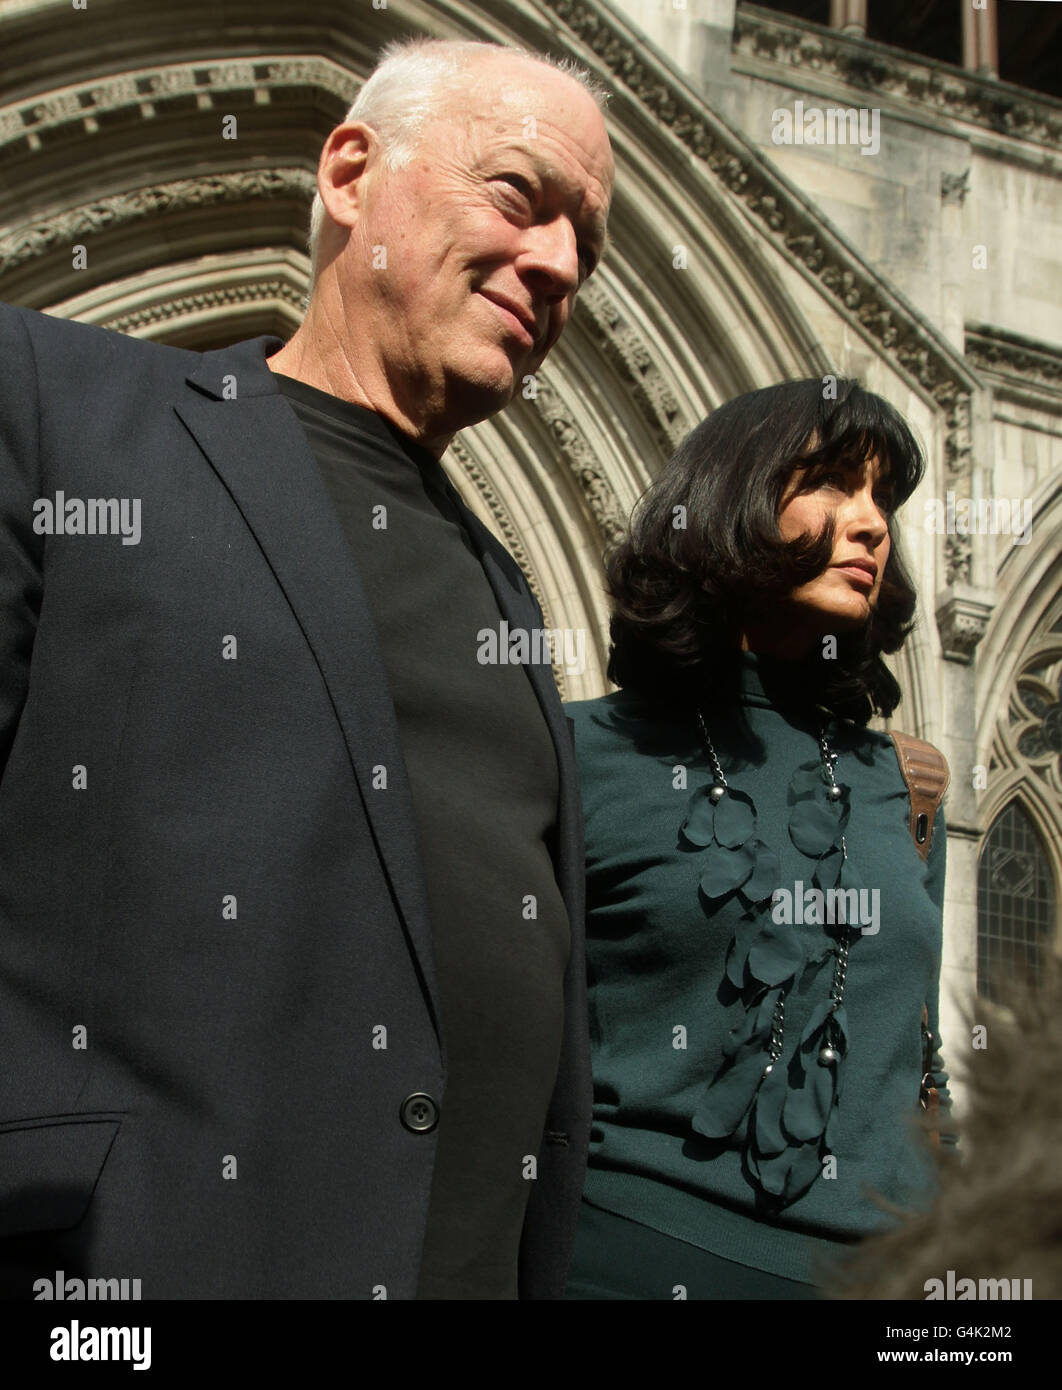 David Gilmour and wife Polly Samson, the parents of Charlie Gilmour, leave the Royal Courts of Justice, London, after hearing a plea on behalf of their son for a cut in his 16-month jail sentence for going on a drink and drug-fuelled rampage at a student fees protest. Stock Photo